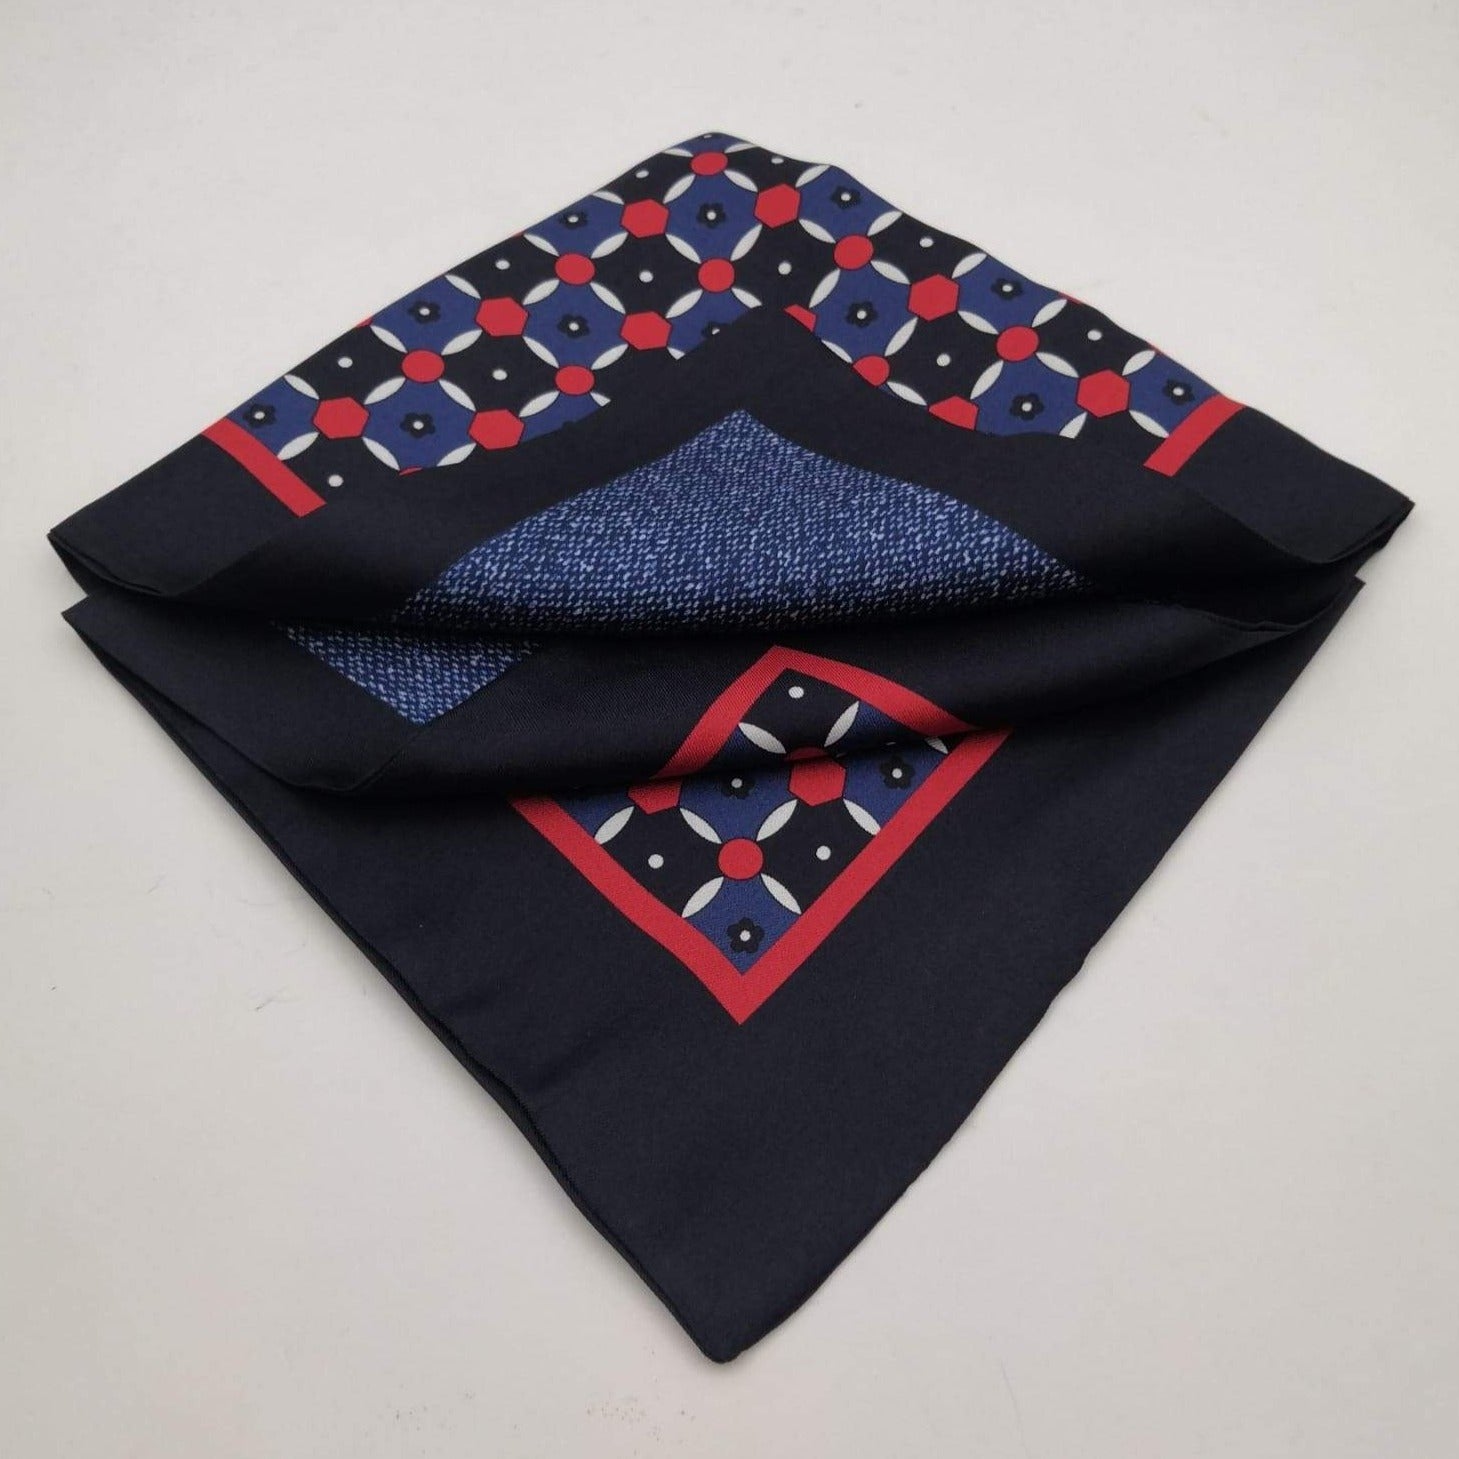 Cruciani & Bella 100% Silk Dark Blue ,Red and White Double Patterned Motif Poket Square Double Faces Made in Italy 33 cm X 33 cm #6151